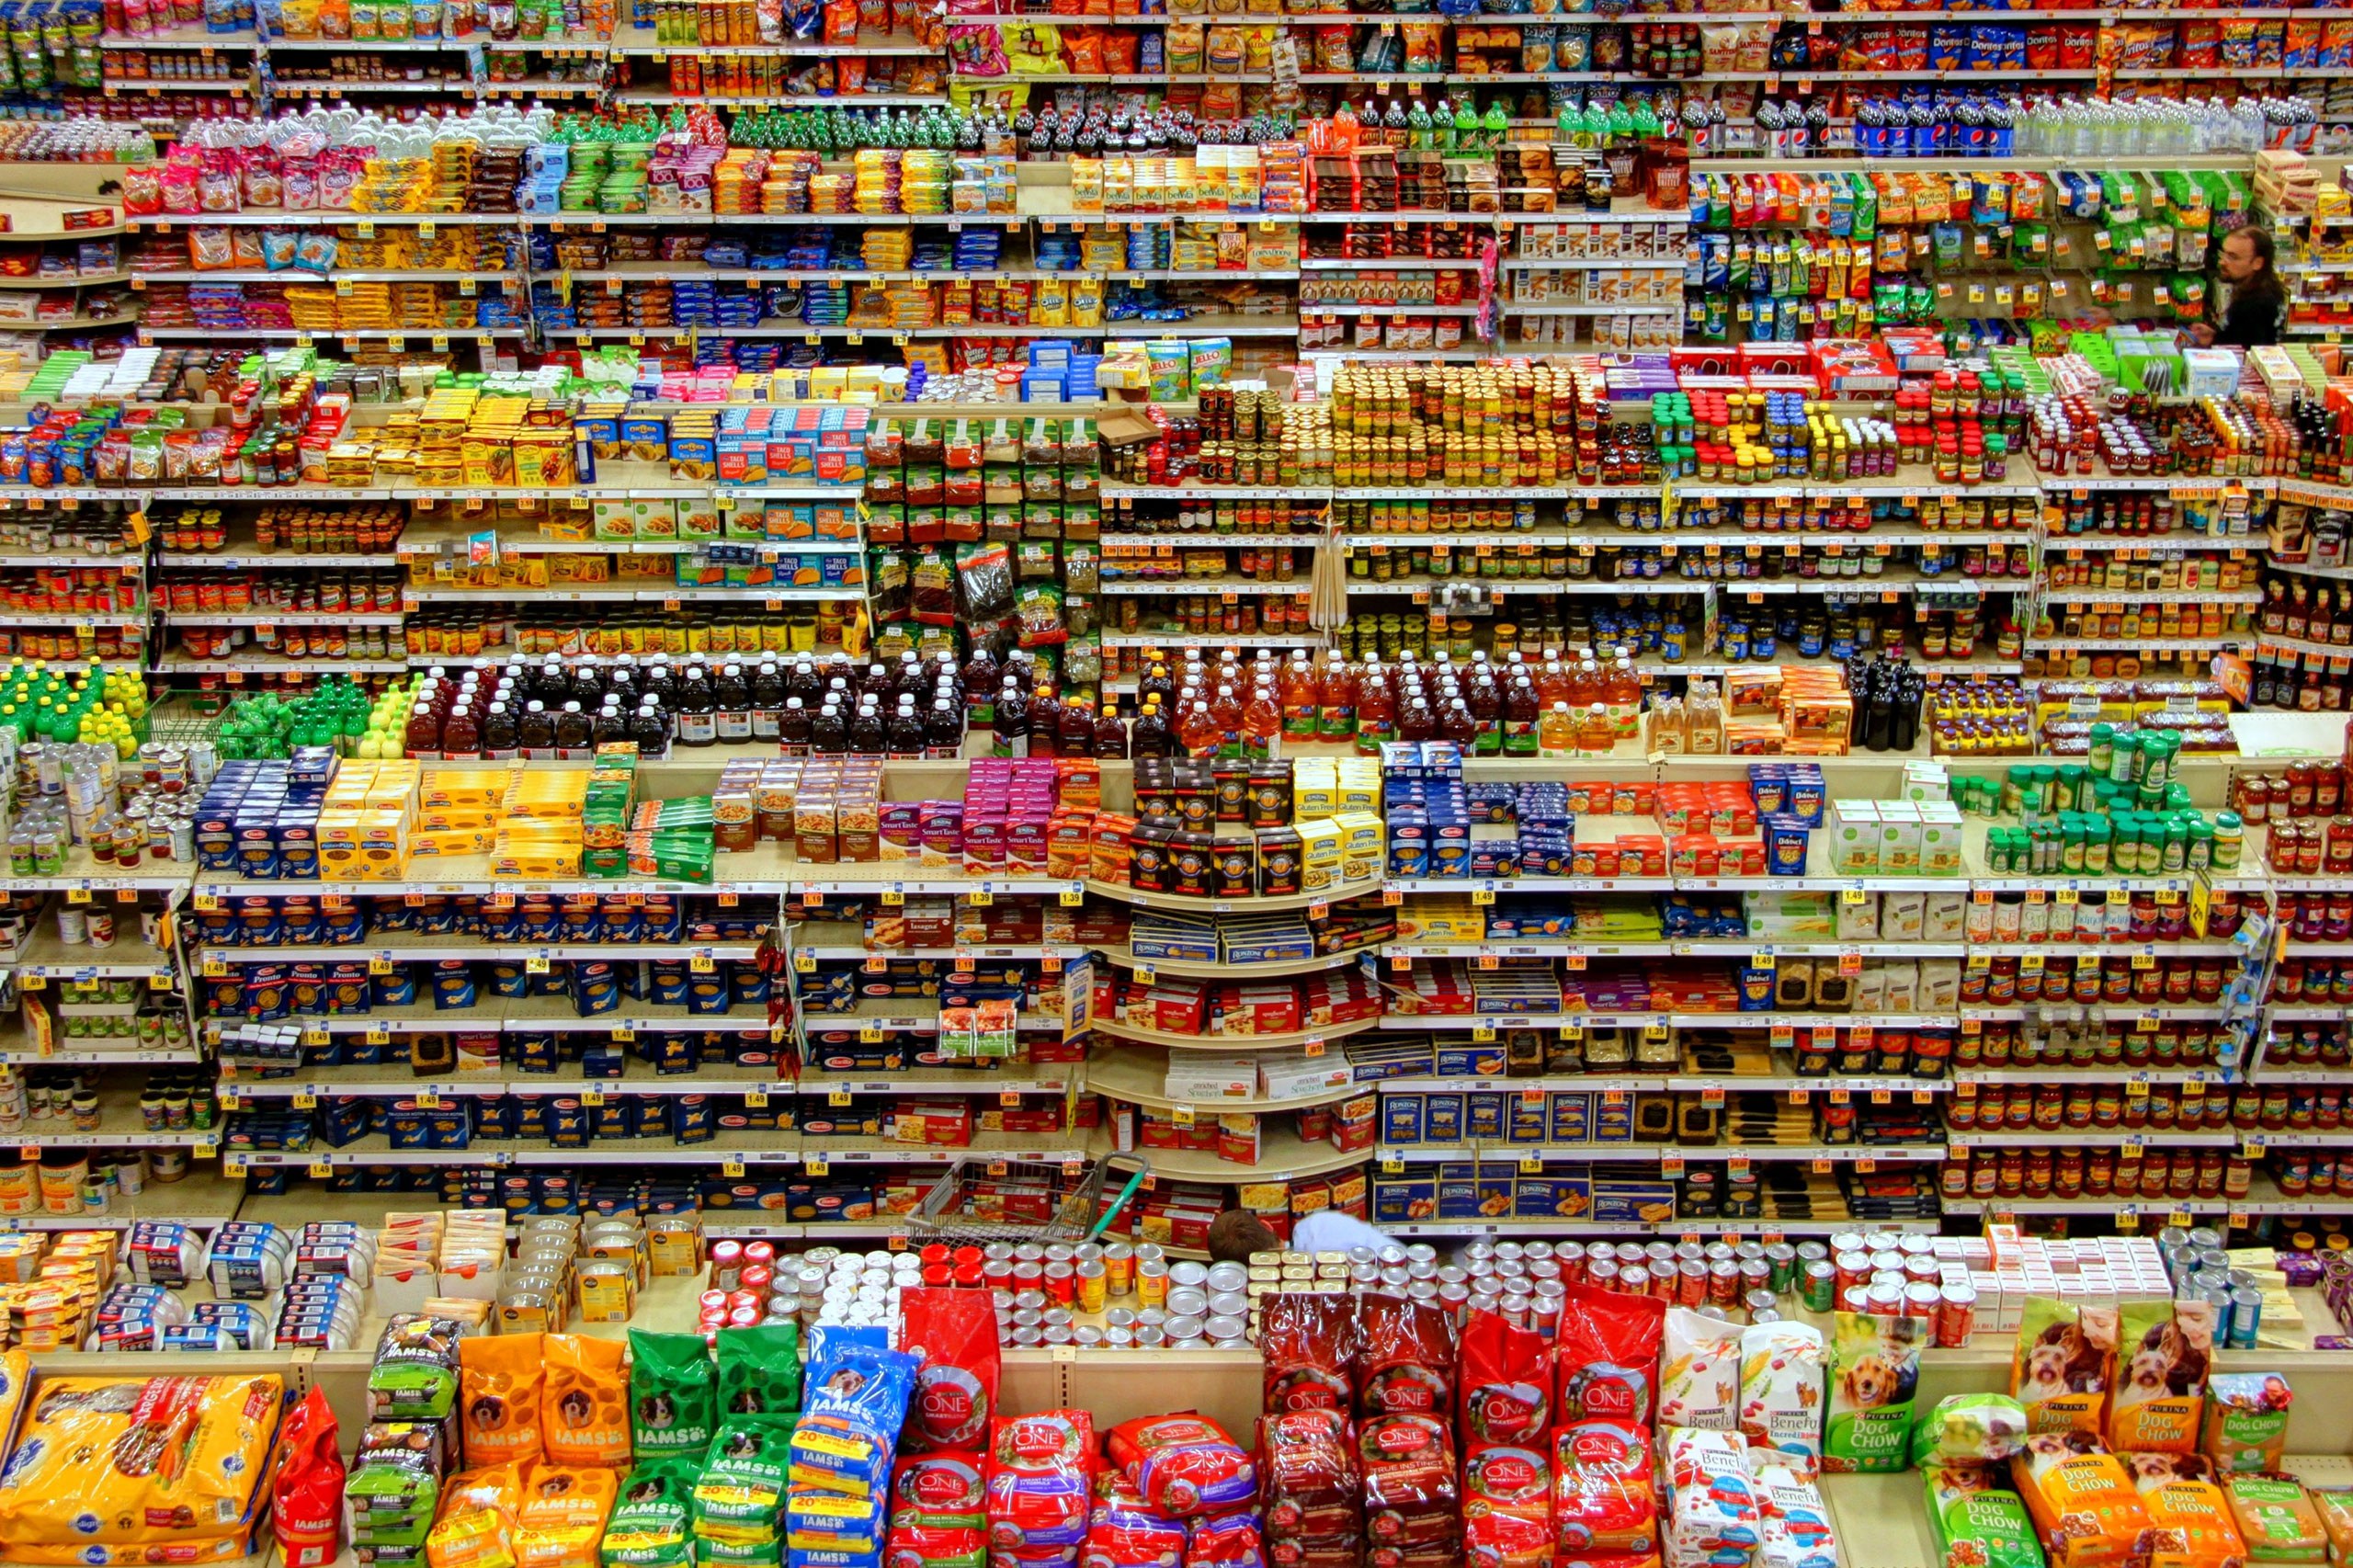 Busy and colourful shelves in a shop full of varied products.